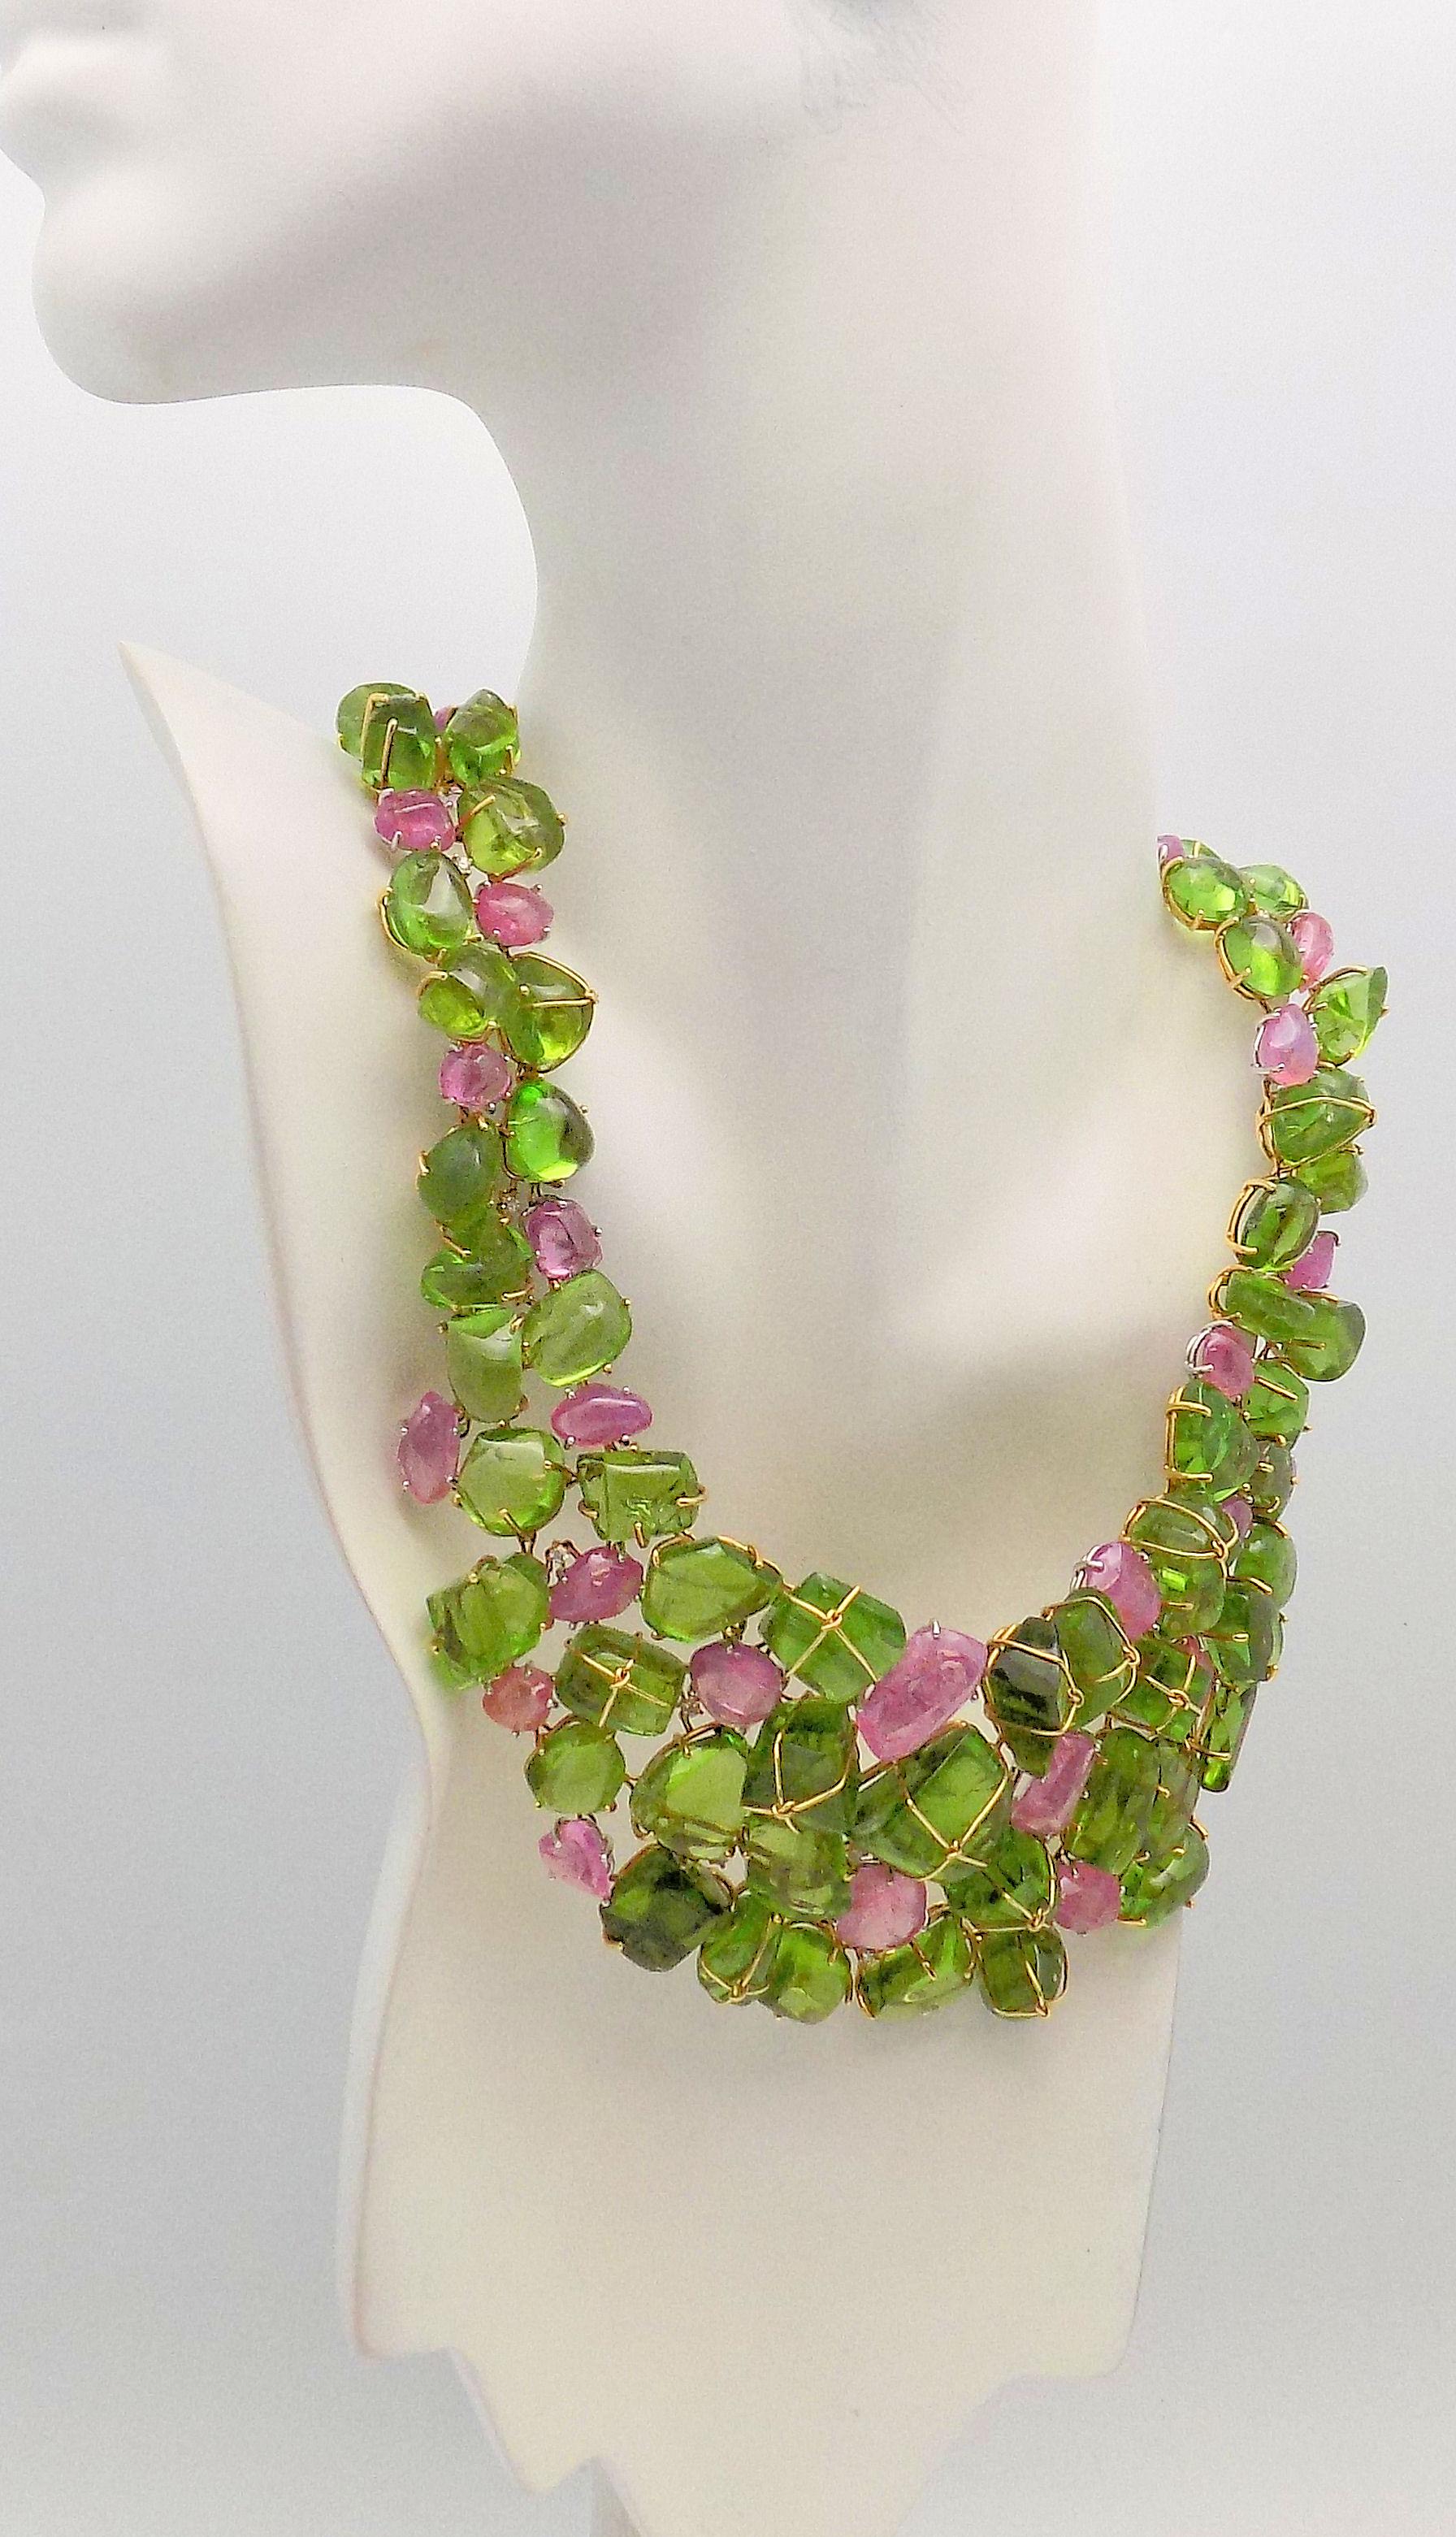 Dramatic Platinum and 18 Karat Yellow Gold Handmade Collar Style Necklace Set with Cabochon Peridots 766.90 Carat Total Weight, Cabochon Pink Sapphires 162.46 Carat Total Weight; Ruby 12.81 Carat; 18 Round Diamonds 0.75 Carat Total Weight, VS-2,